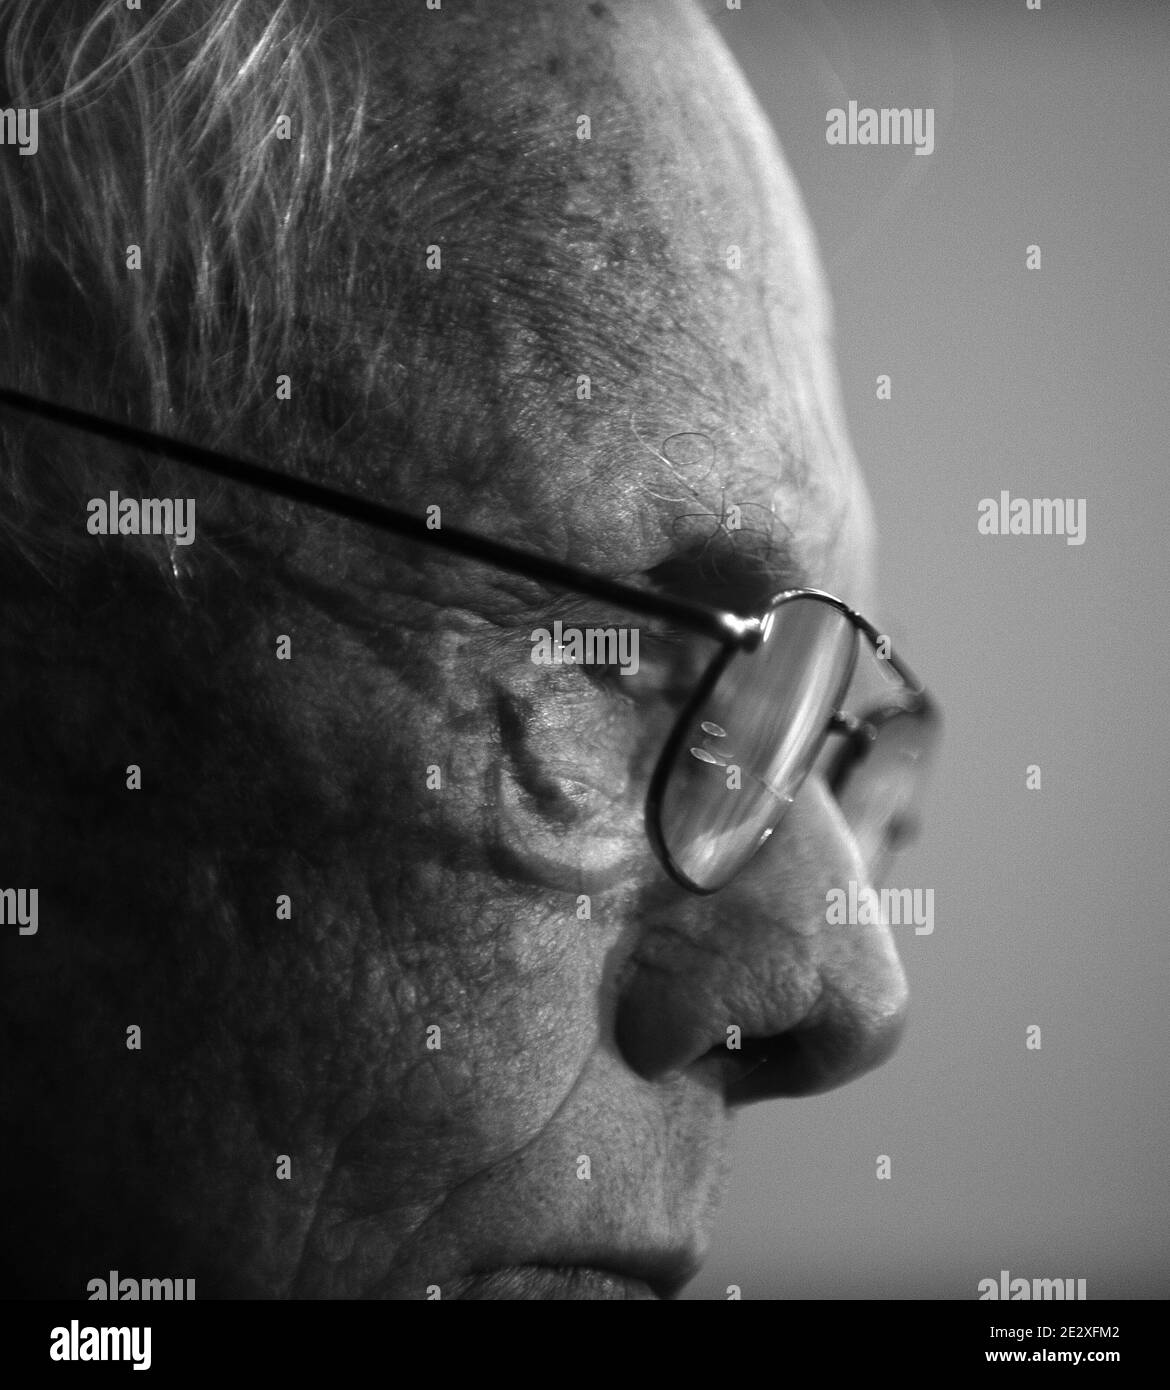 Retired astronaut Neil Armstrong, commander of Apollo 11 space mission testifies at a hearing on the future of U.S. human space flight , on Capitol Hill in Washington, DC, USA, May 12, 2010. Photo by Olivier Douliery /ABACAPRESS.COM Stock Photo